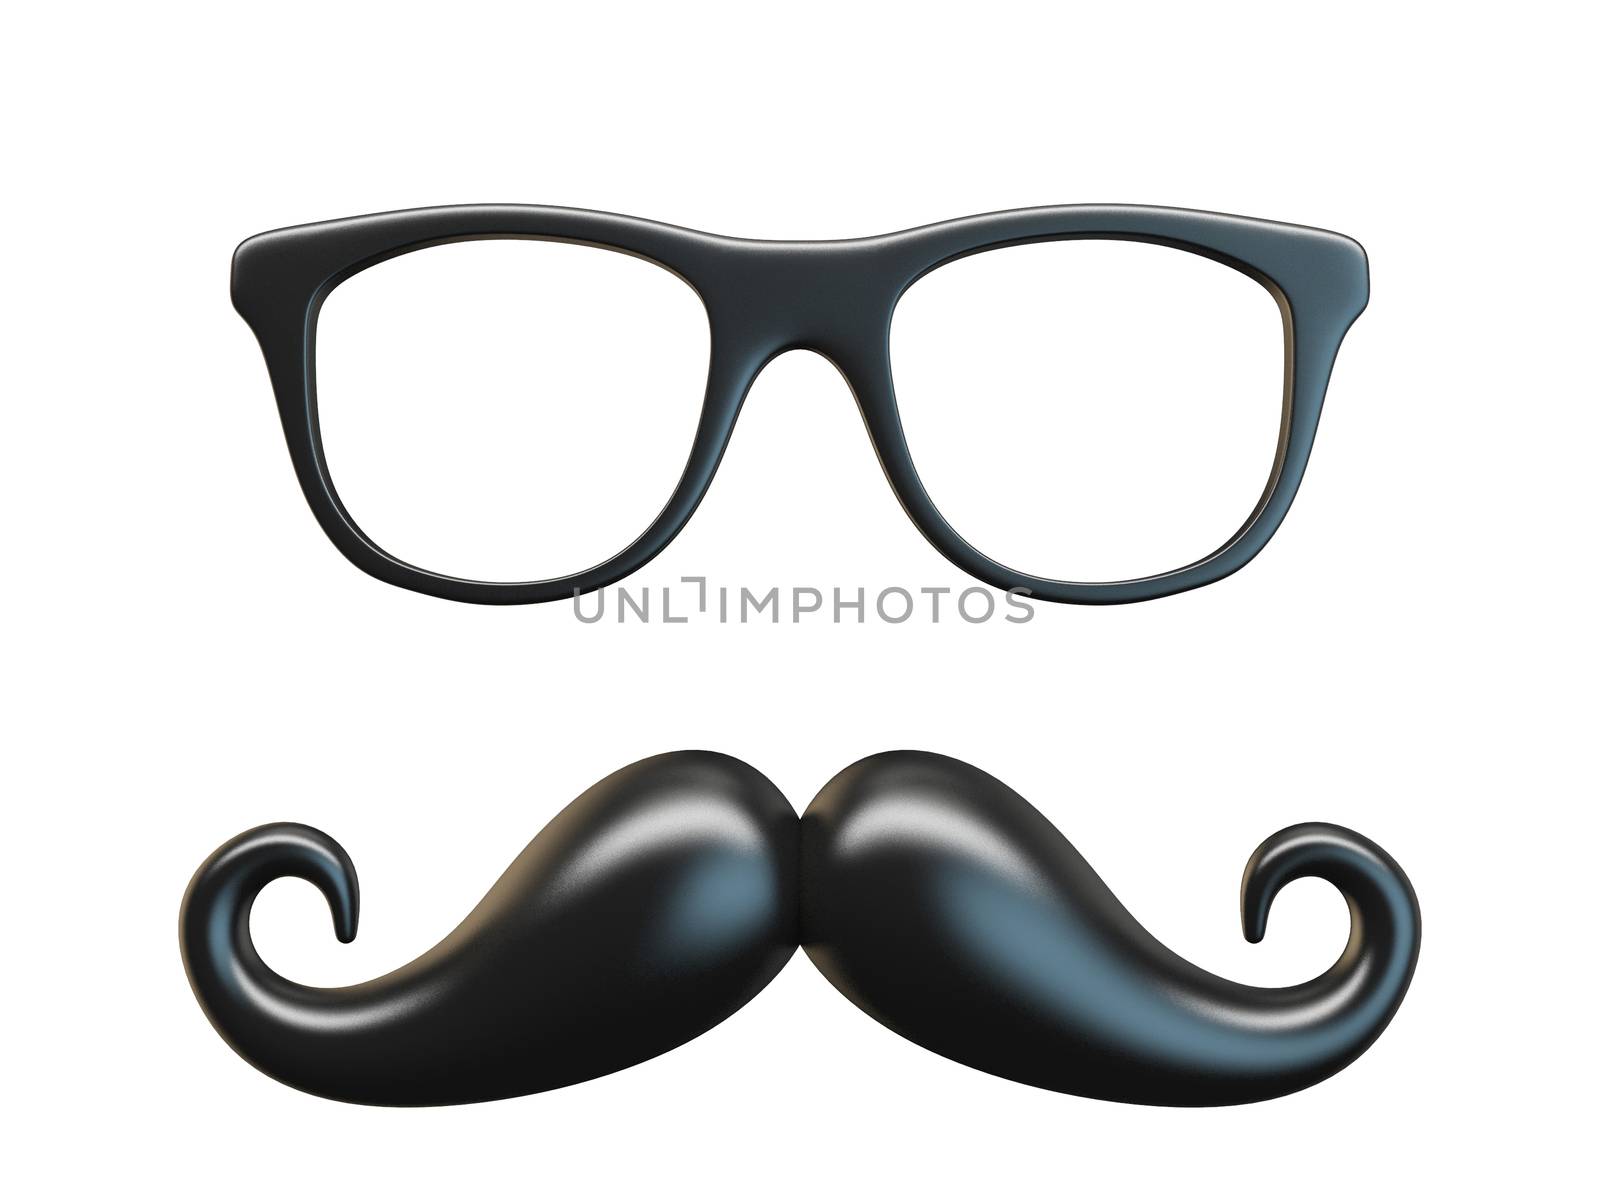 Black mustache and glasses 3D rendering illustration isolated on white background